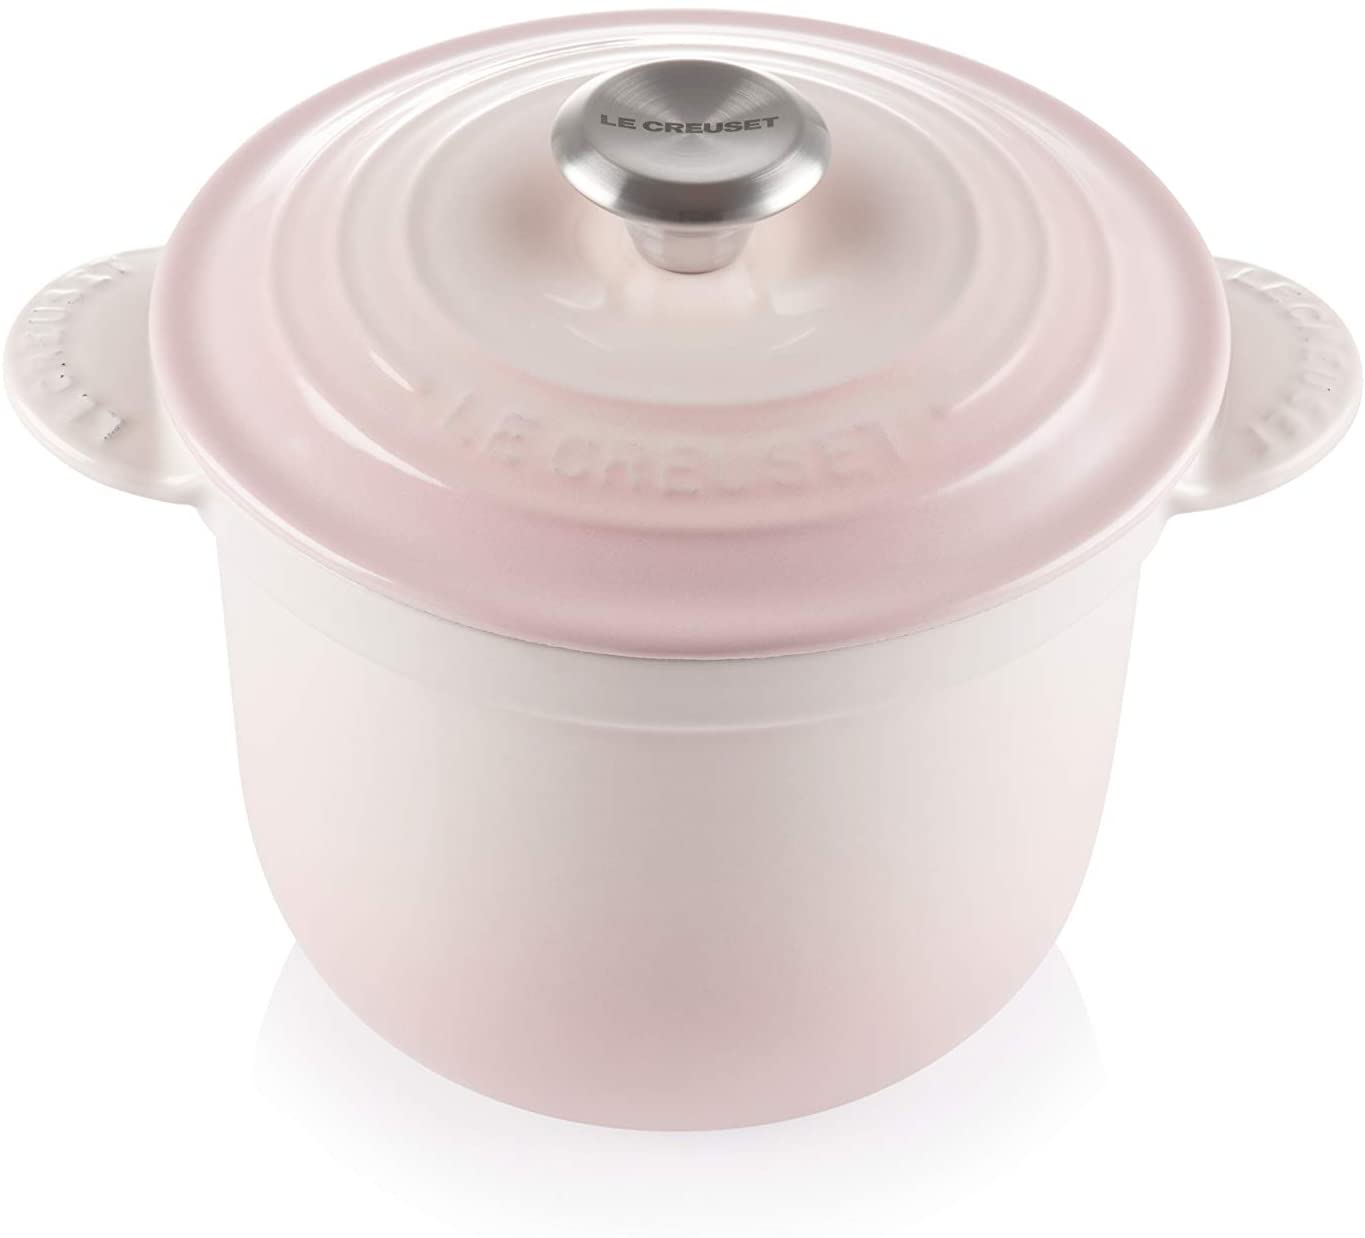 [ Genuine ] Le Creuset Cocotte Rondo Pot 18cm Color Shell pink from ...